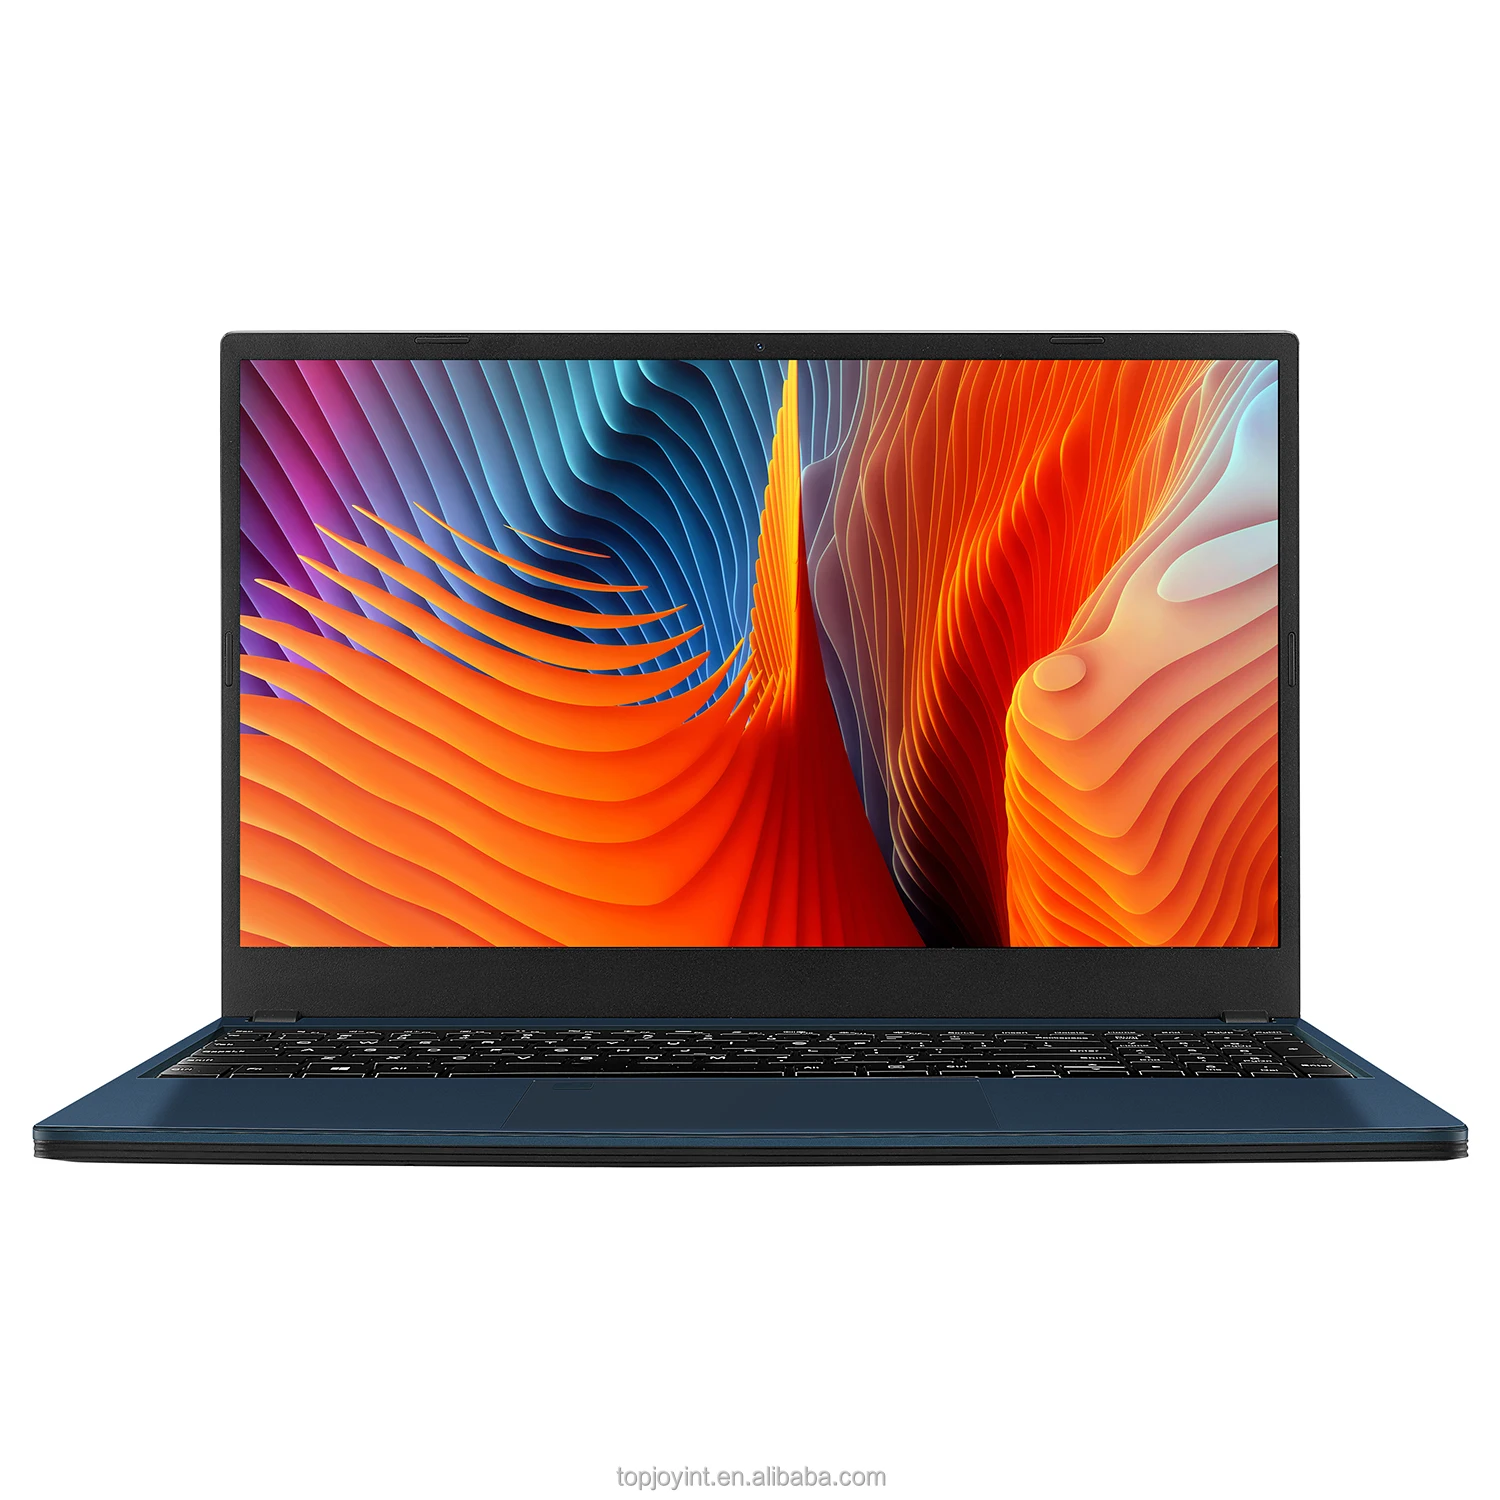 

1Topjoy Great Asia Cheap Laptop Computer 15.6 inch Screen Core i3 i5 i7 10th Gen wifi 1920x1080 FHD Computers Laptops